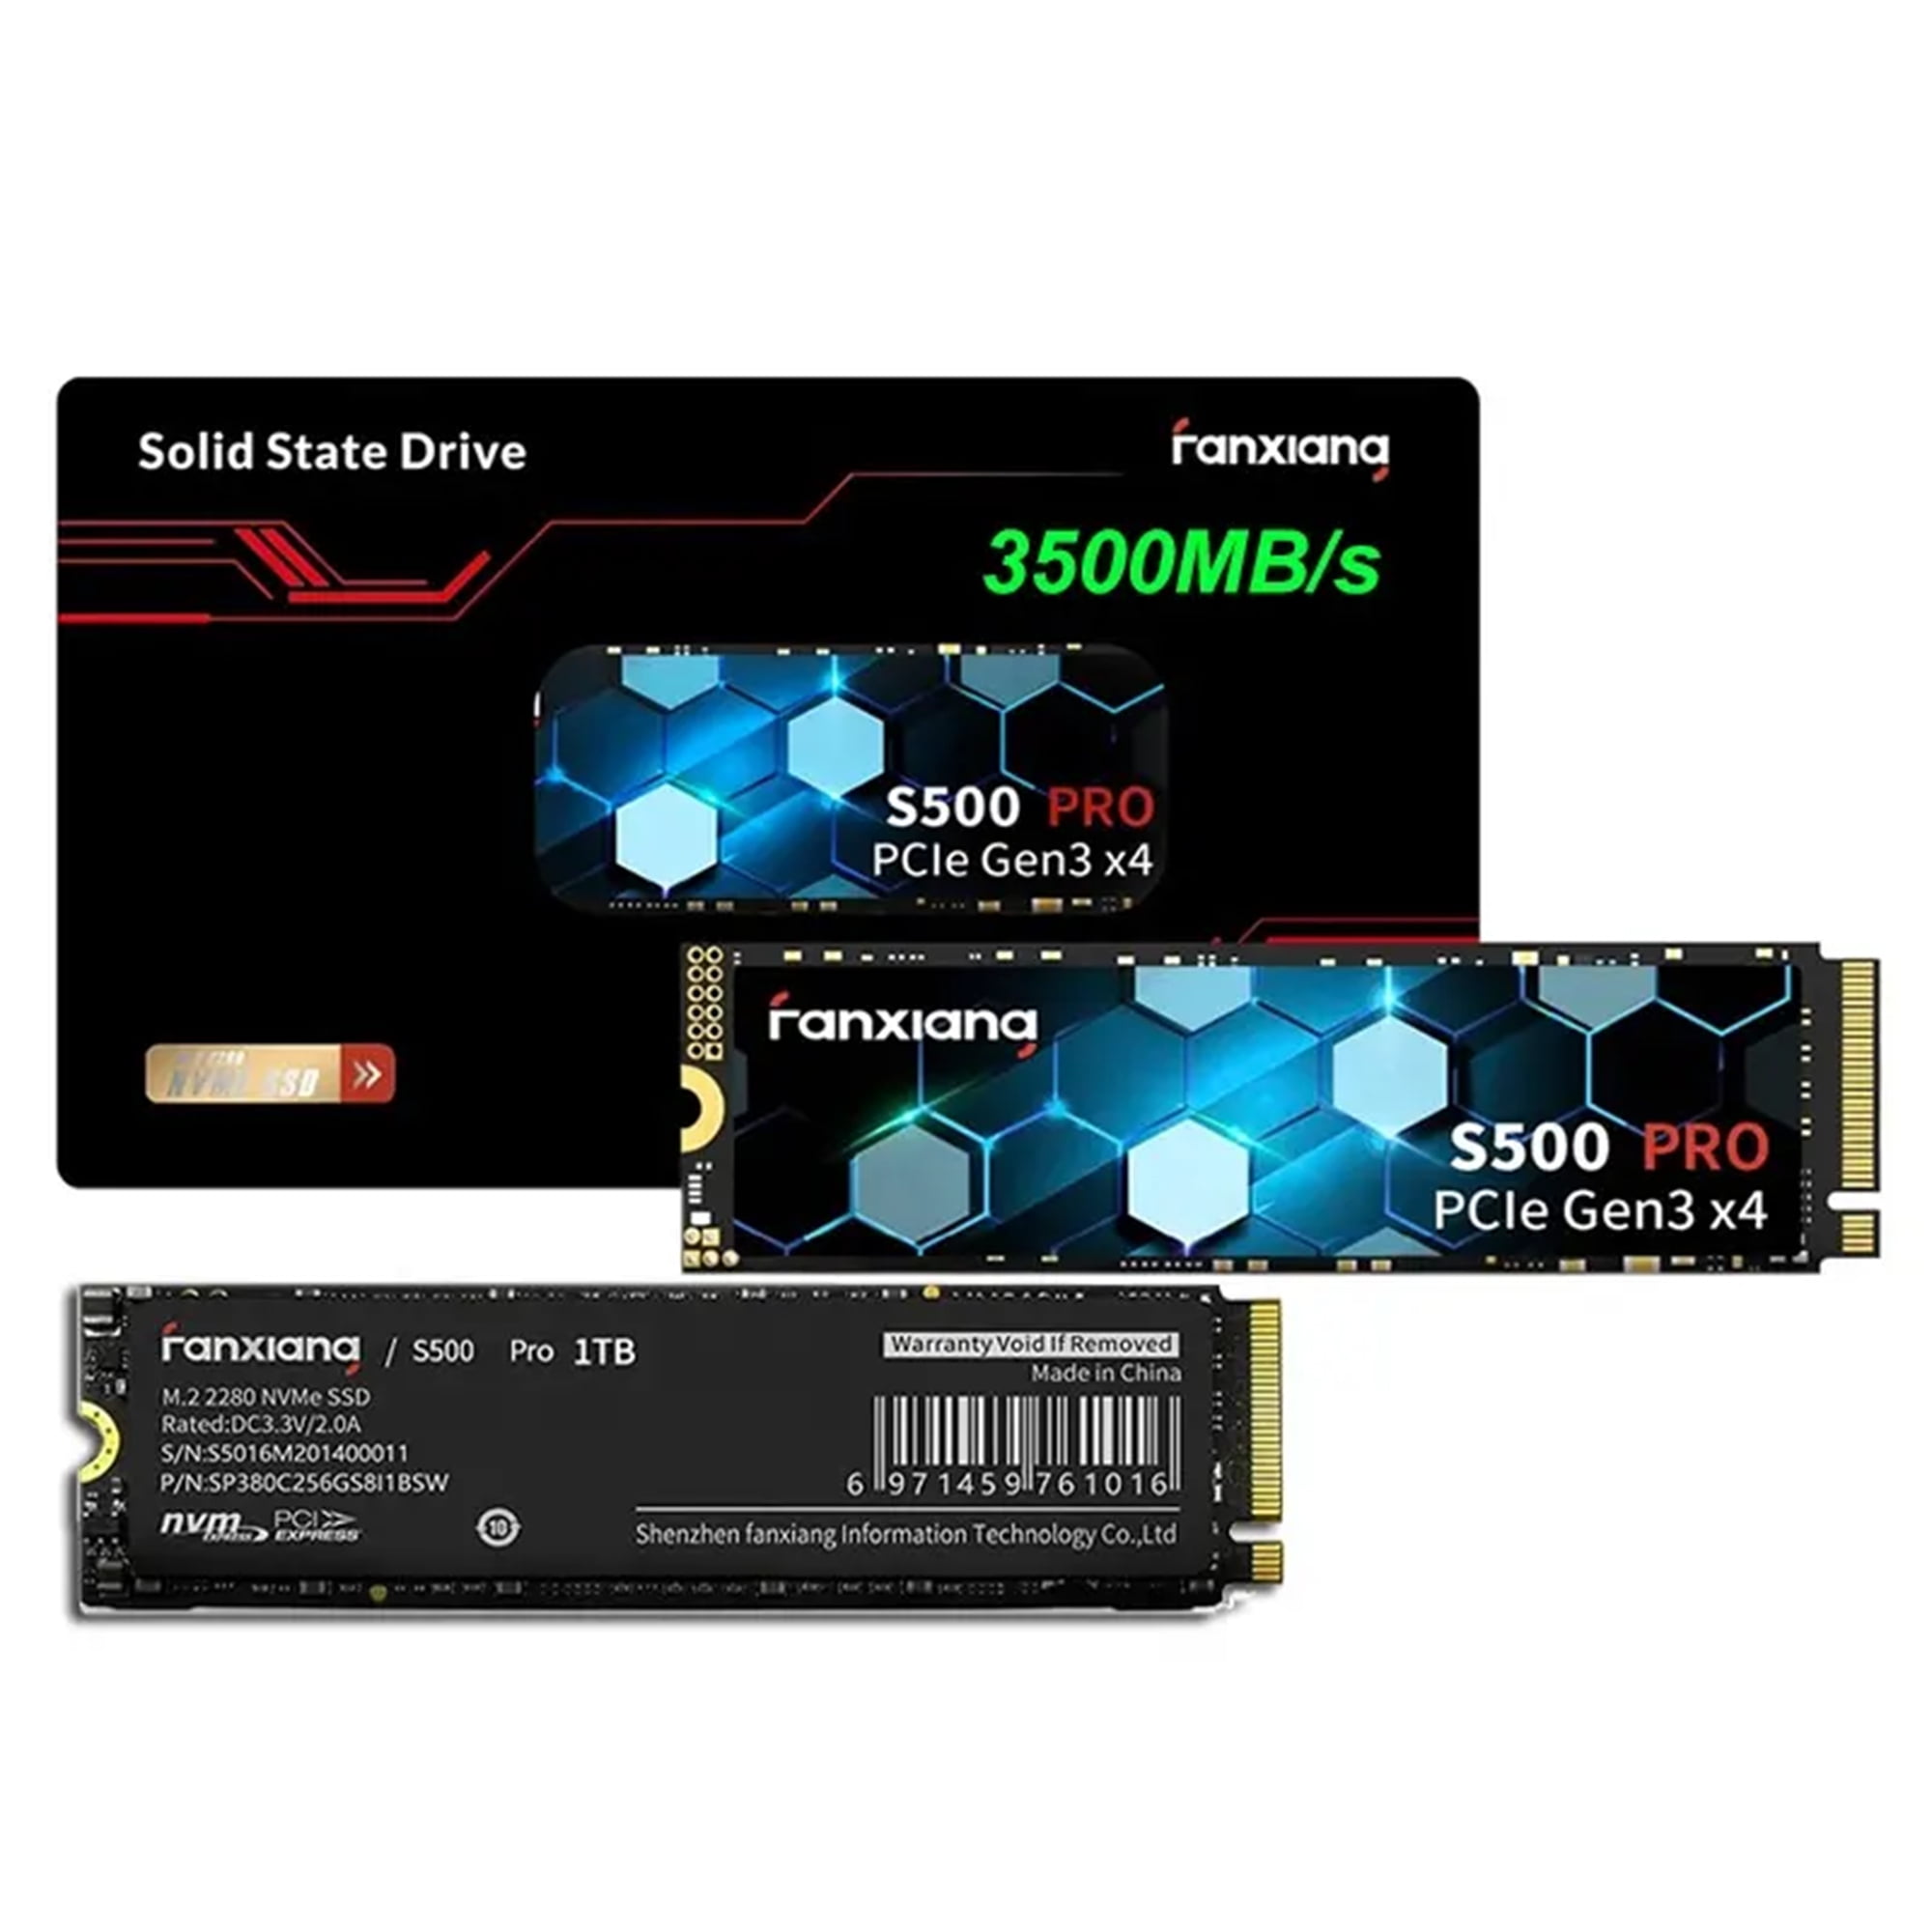 Remission aldrig aldrig fanxiang S500 Pro 256GB NVMe SSD m.2 PCIe Gen3x4 2280 Internal Solid State  Drive,Data up to 2800MB/s - Walmart.com